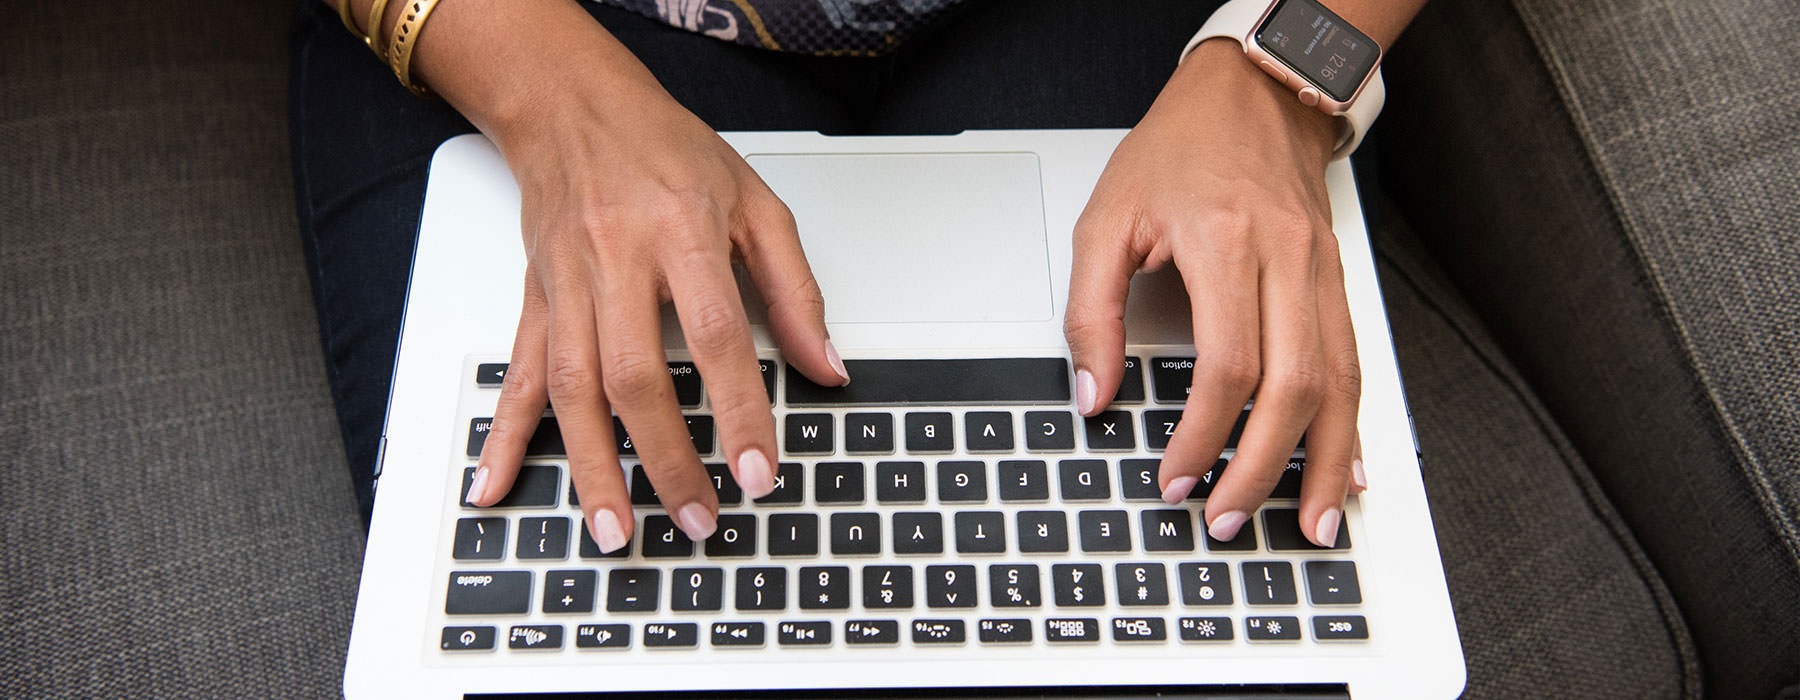 lifestyle image of a person typing on their laptop